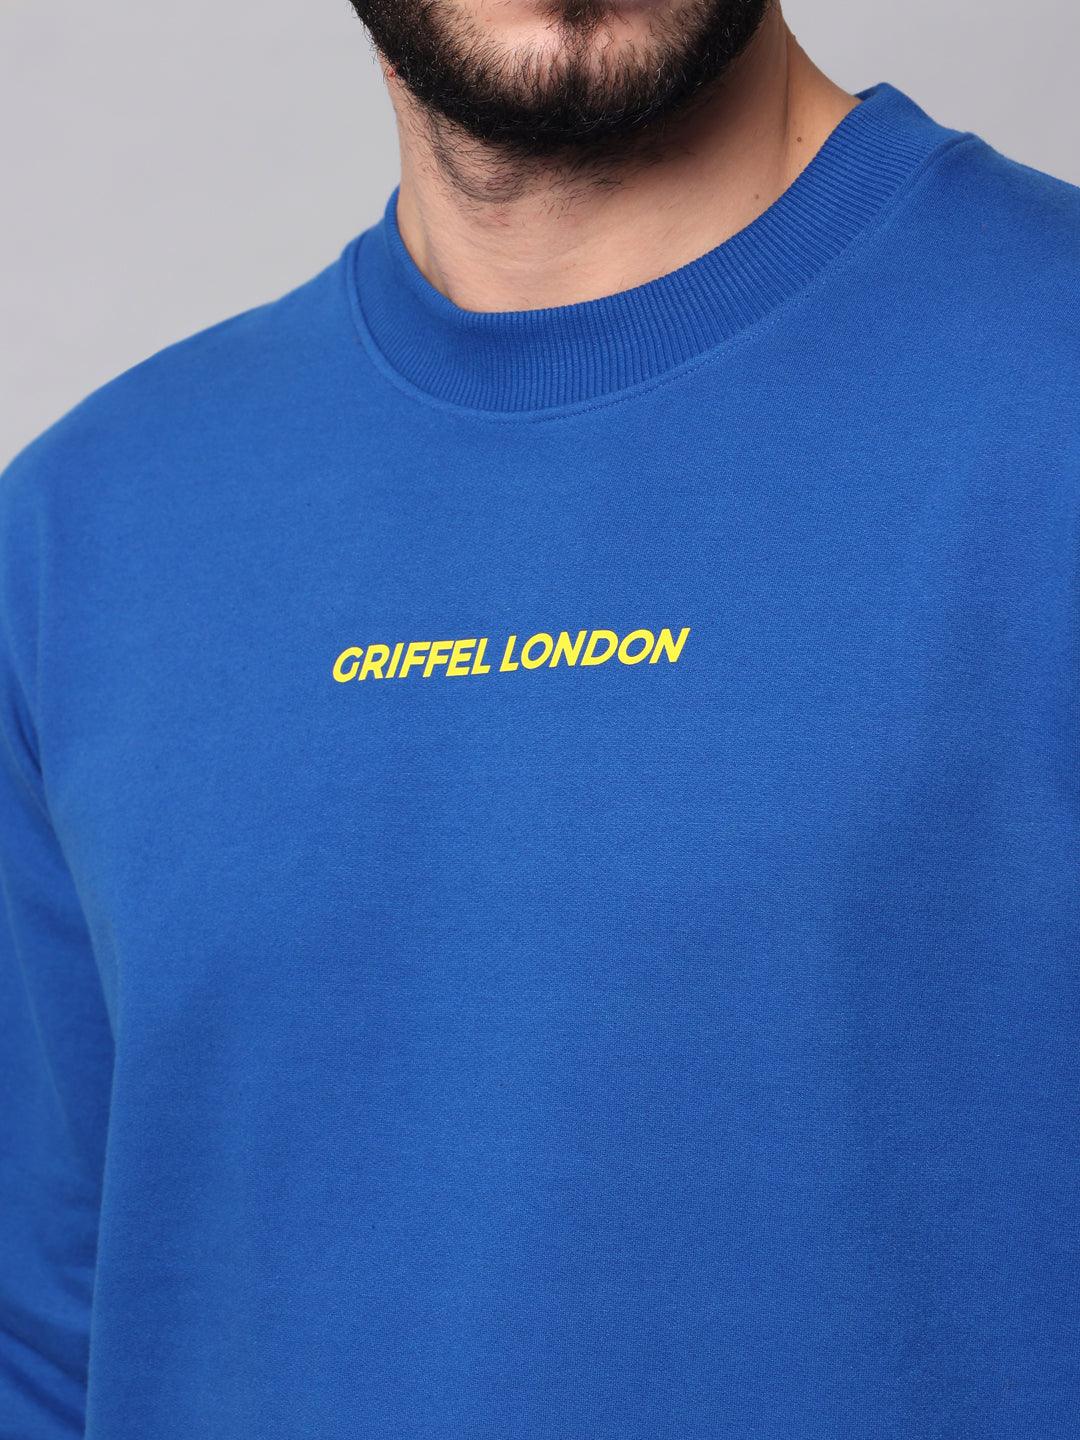 Griffel Men's Cotton Fleece Round Neck Royal Sweatshirt with Full Sleeve and Front Logo Print - griffel